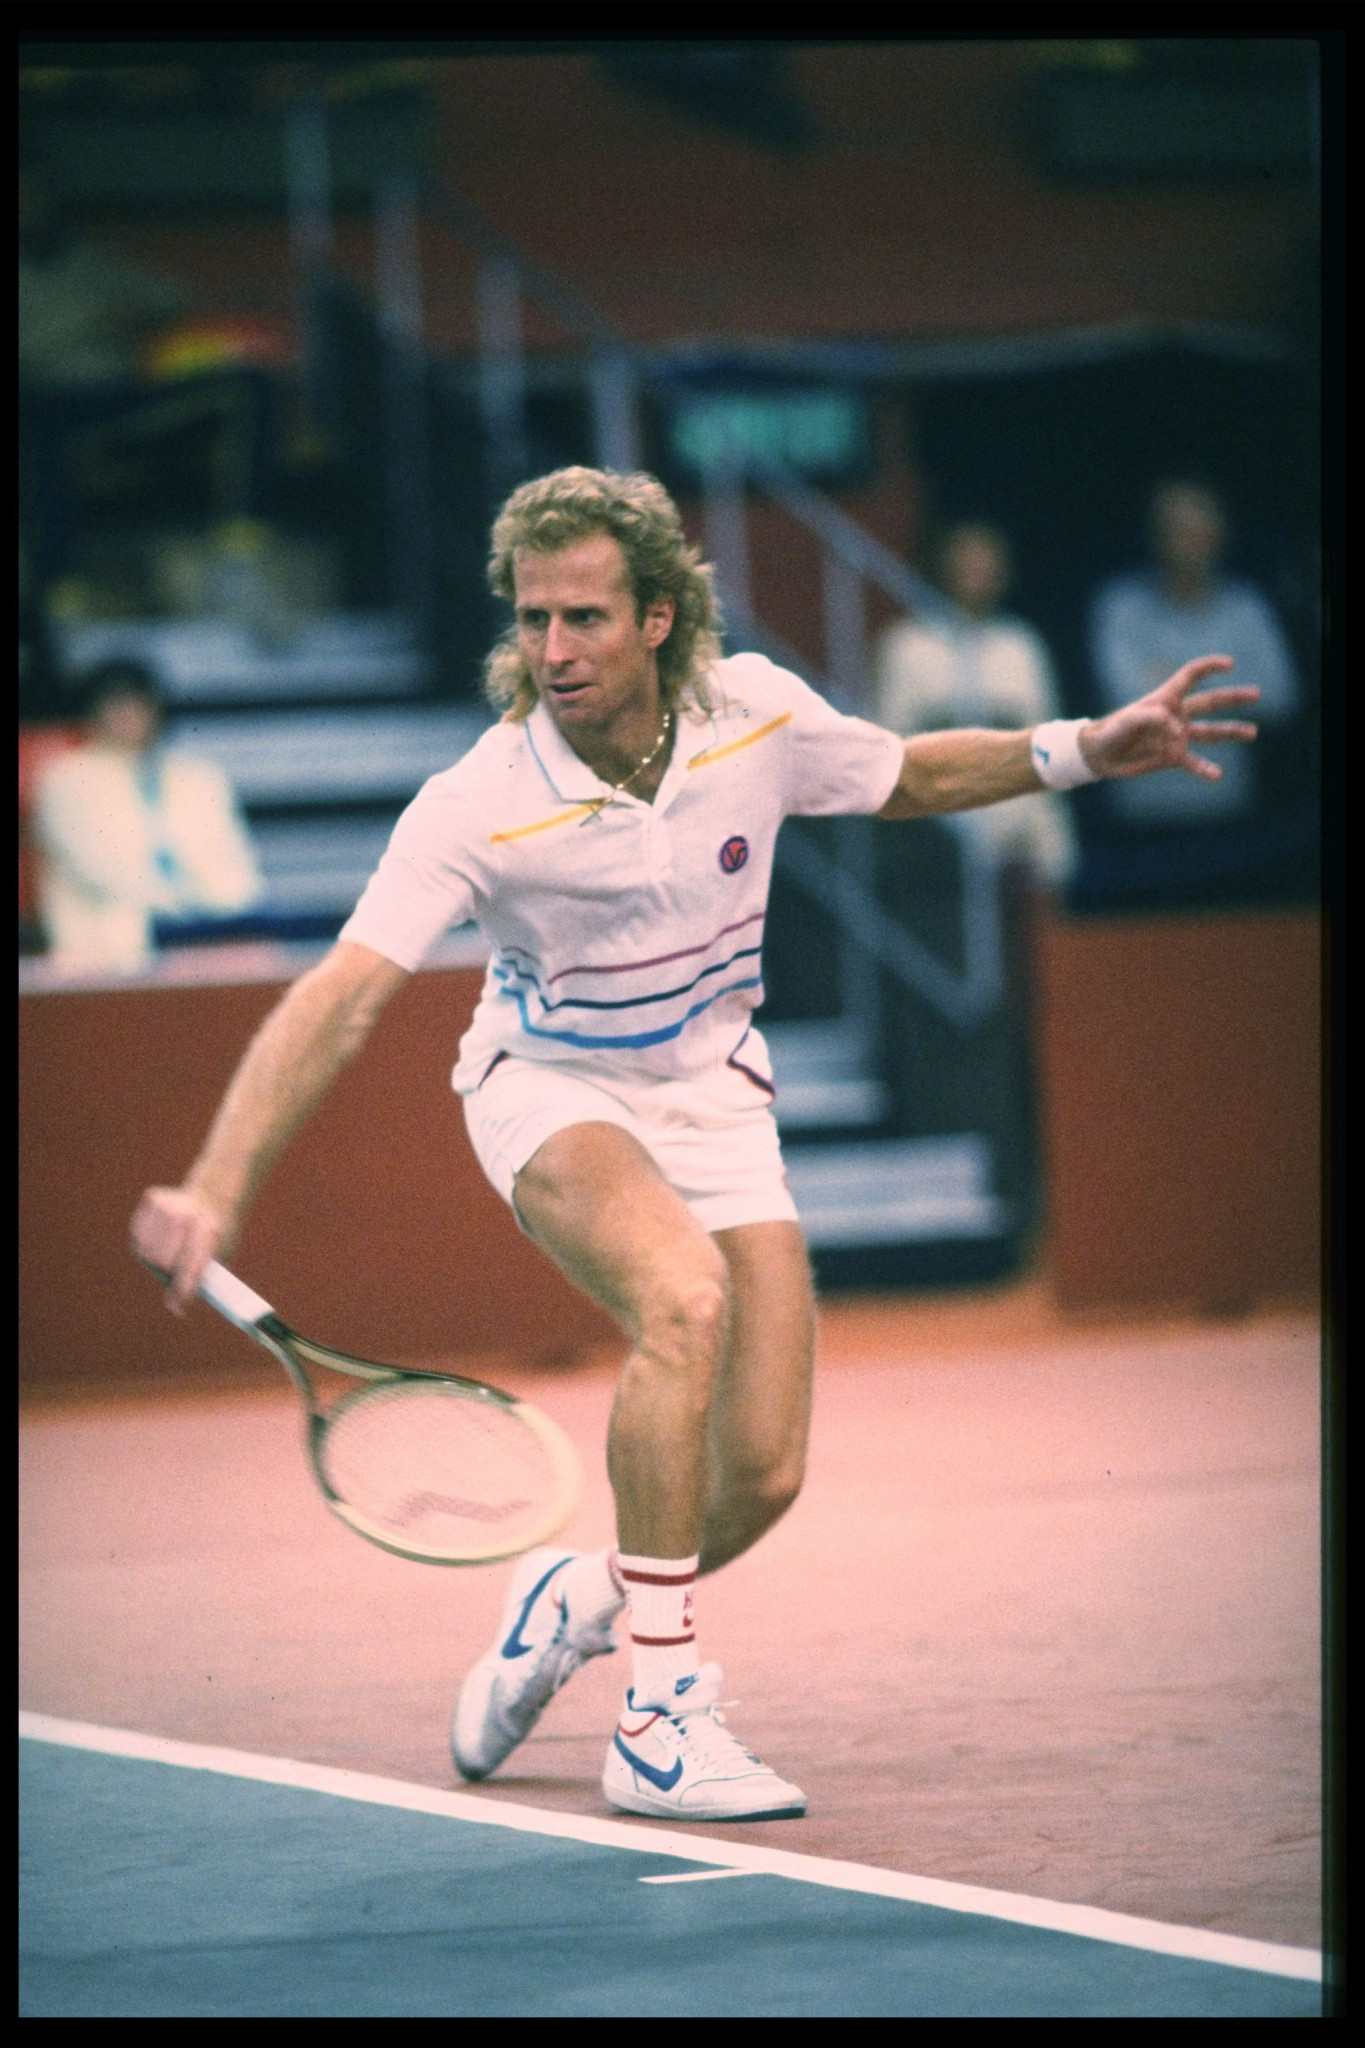 A high performance athlete, on and off the court, America's Vitas Gerulaitis had his big chance at the Australian Open in December 1977 - and he took it ©Getty Images